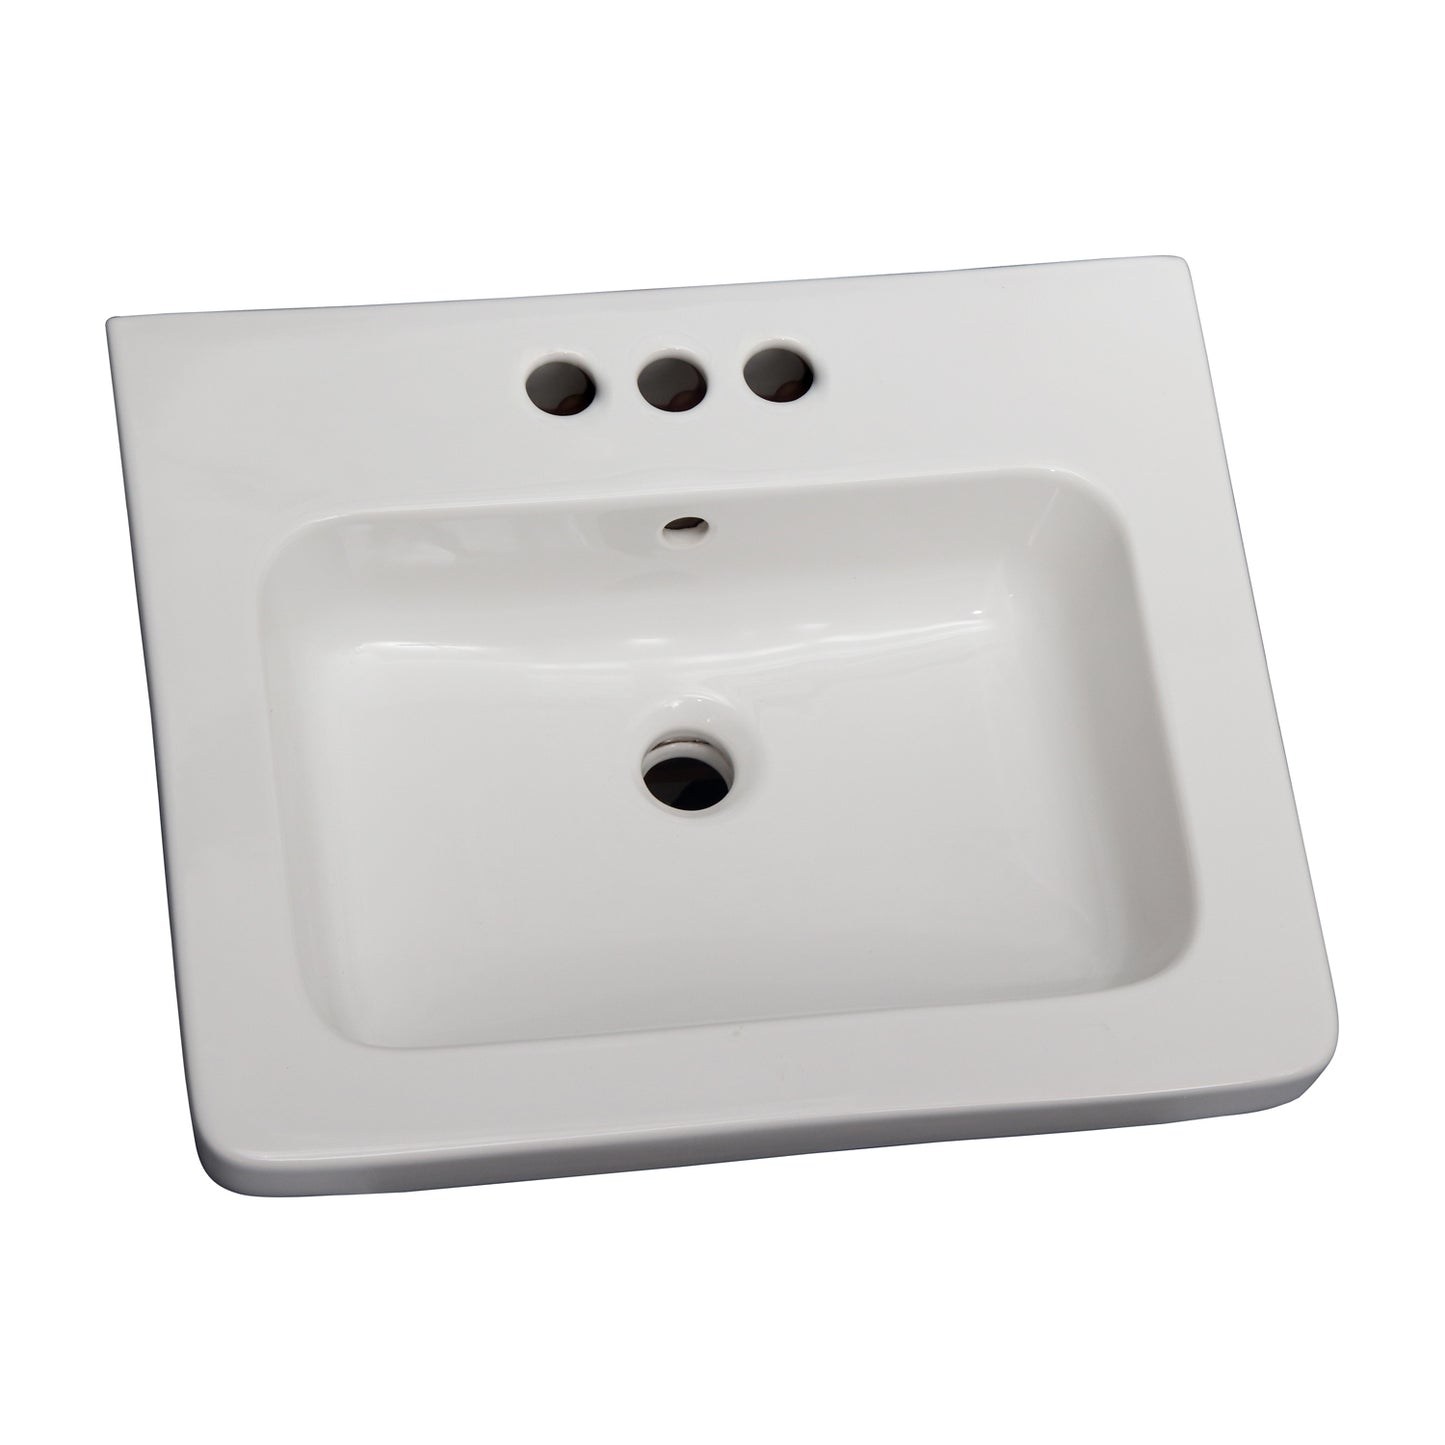 Resort 500 Wall Hung Bathroom Sink White For 8" Widespread Faucet